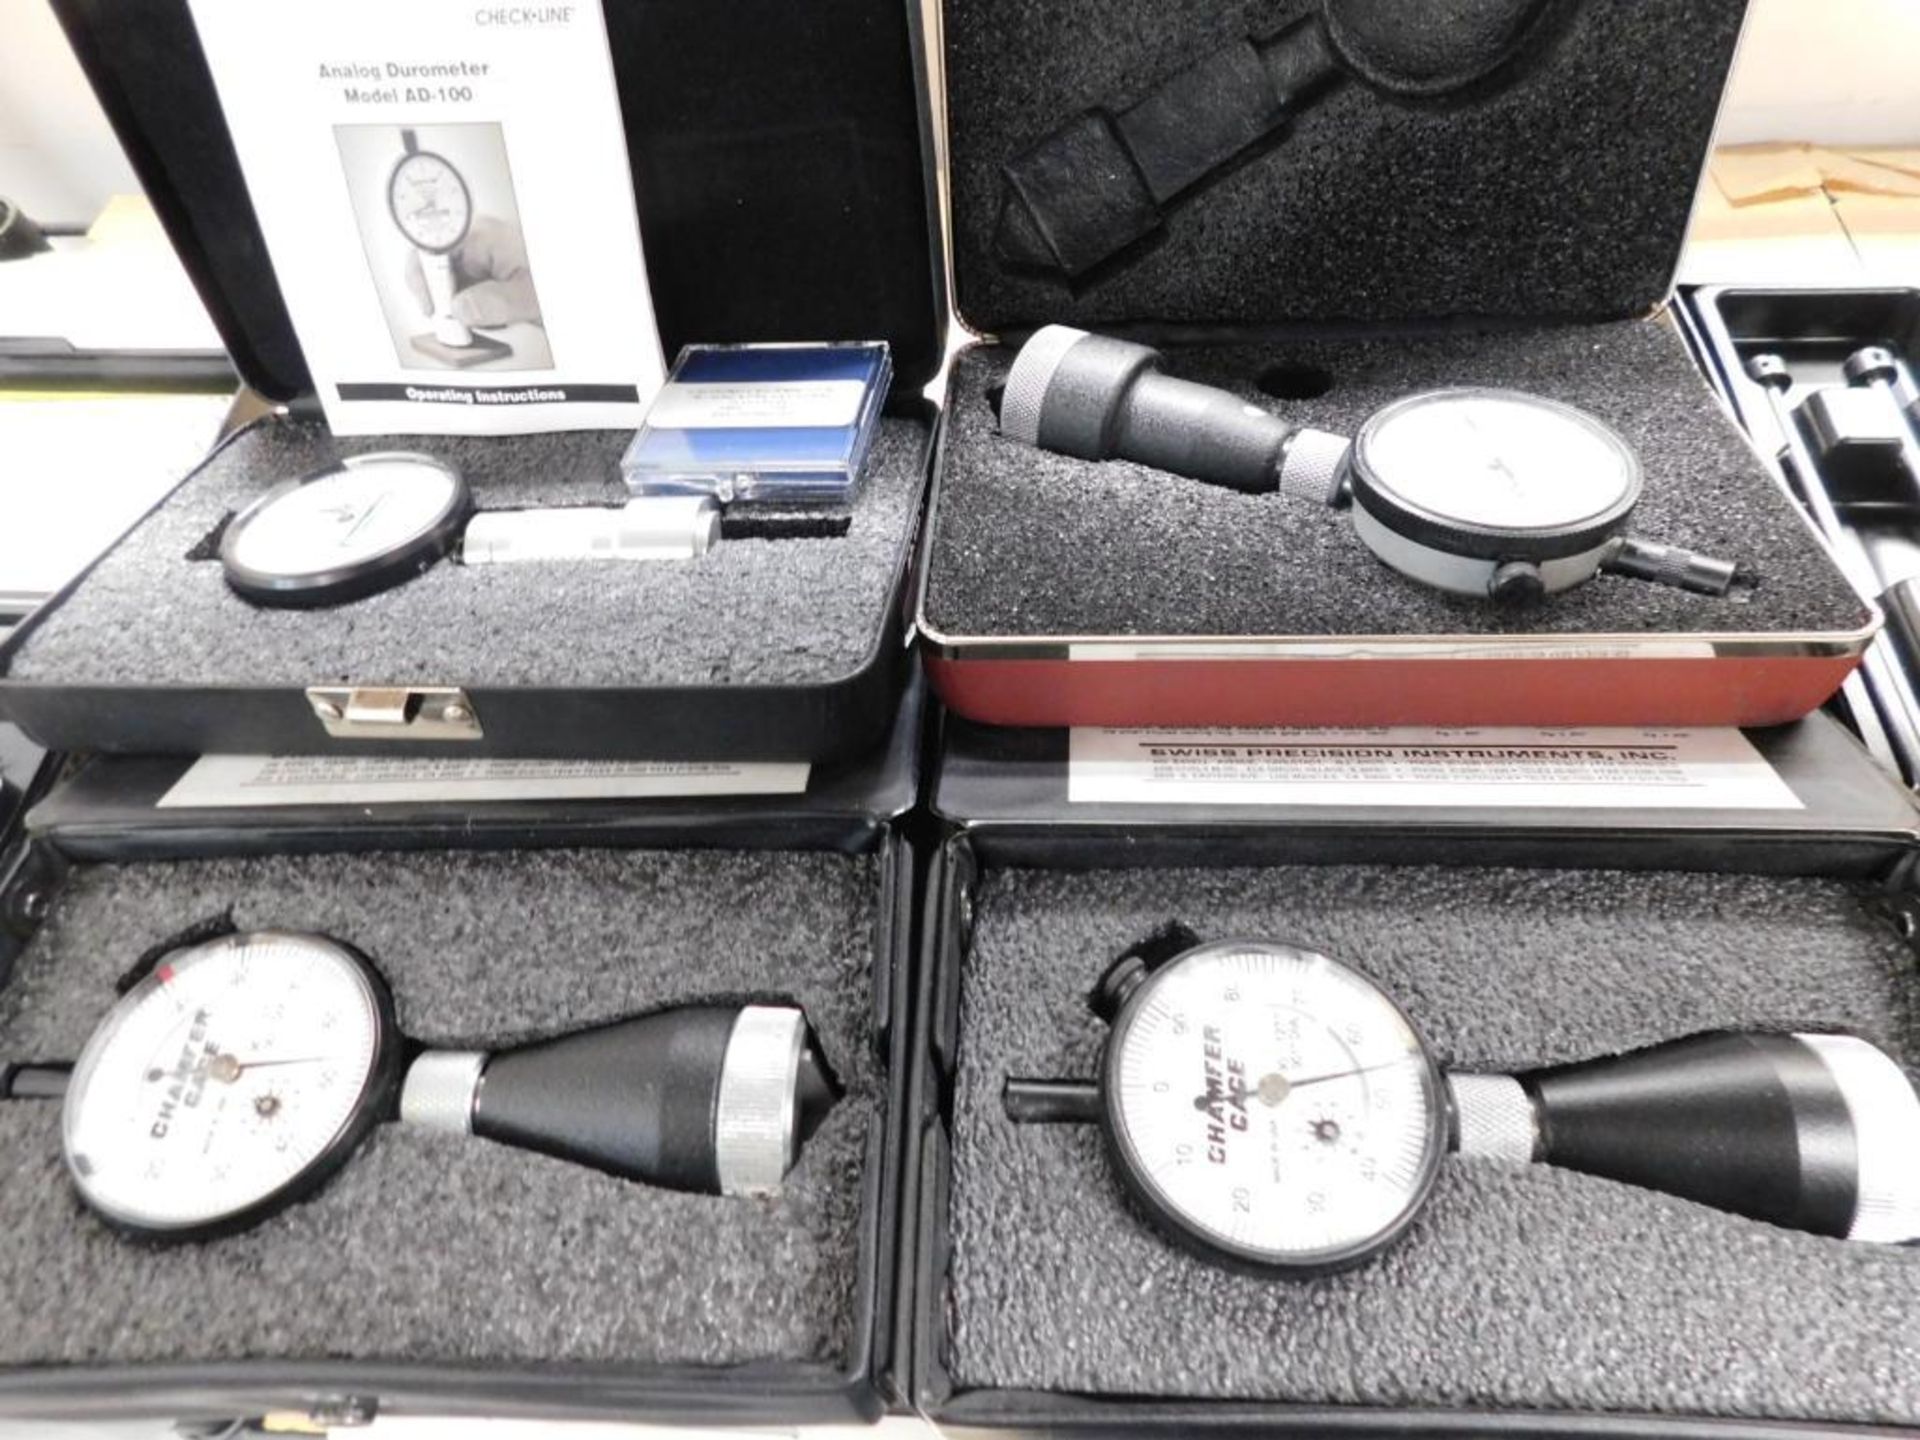 LOT: Chamfer Gages, Durometer, OD Micrometers, Depth Gage, Dial Indicators - Image 3 of 4